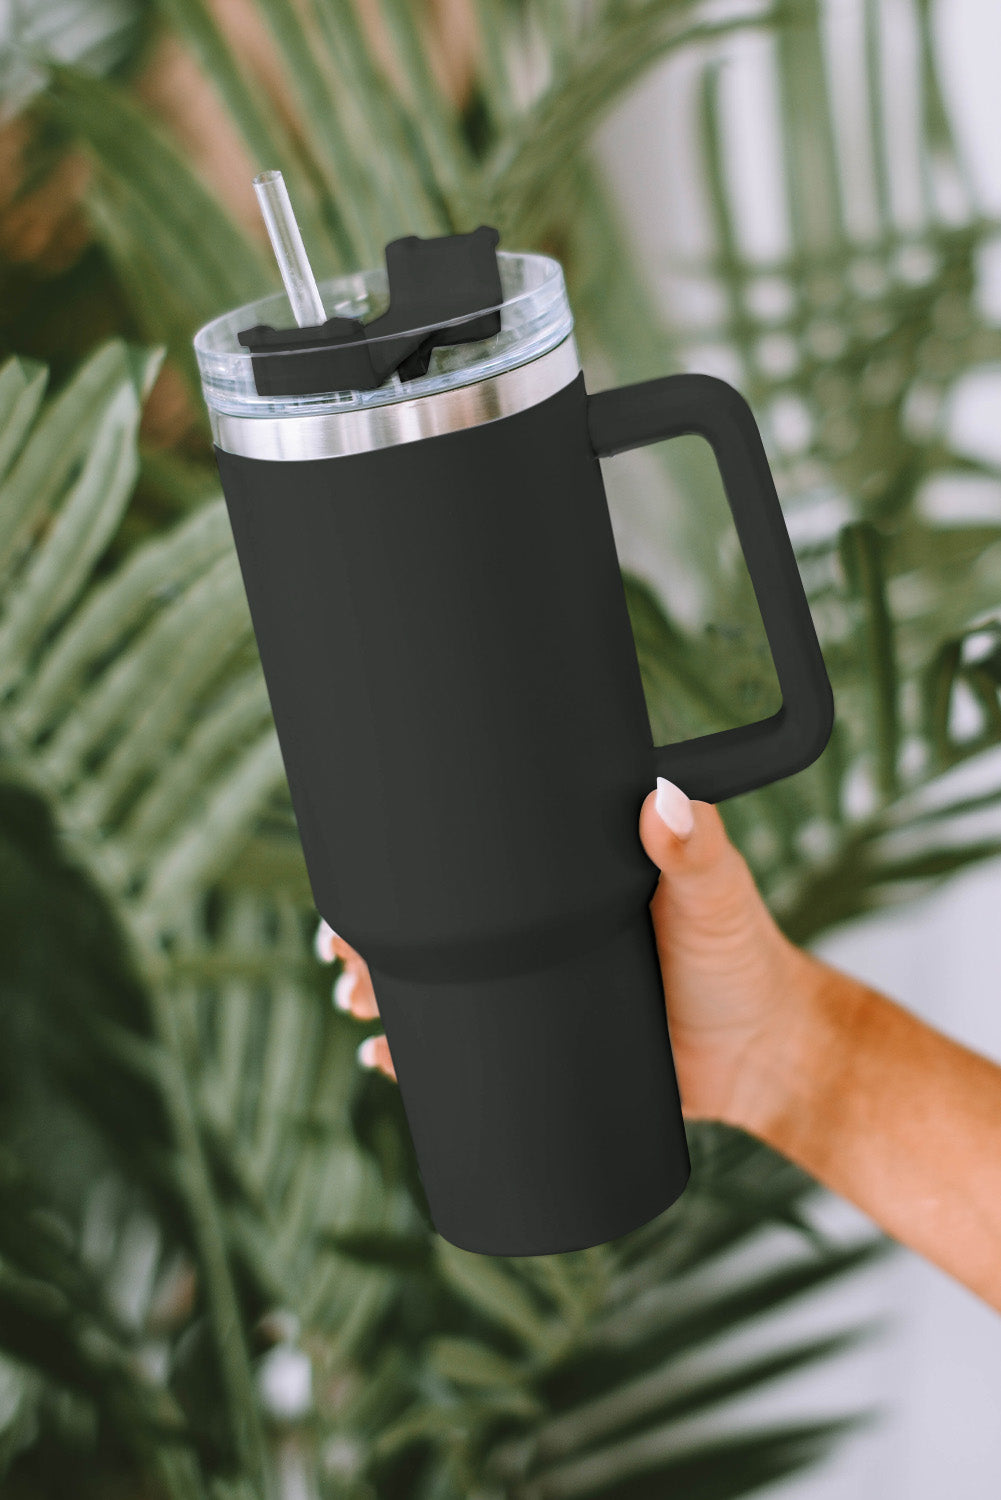 Green 304 Stainless Steel Insulated Tumbler Mug With Straw